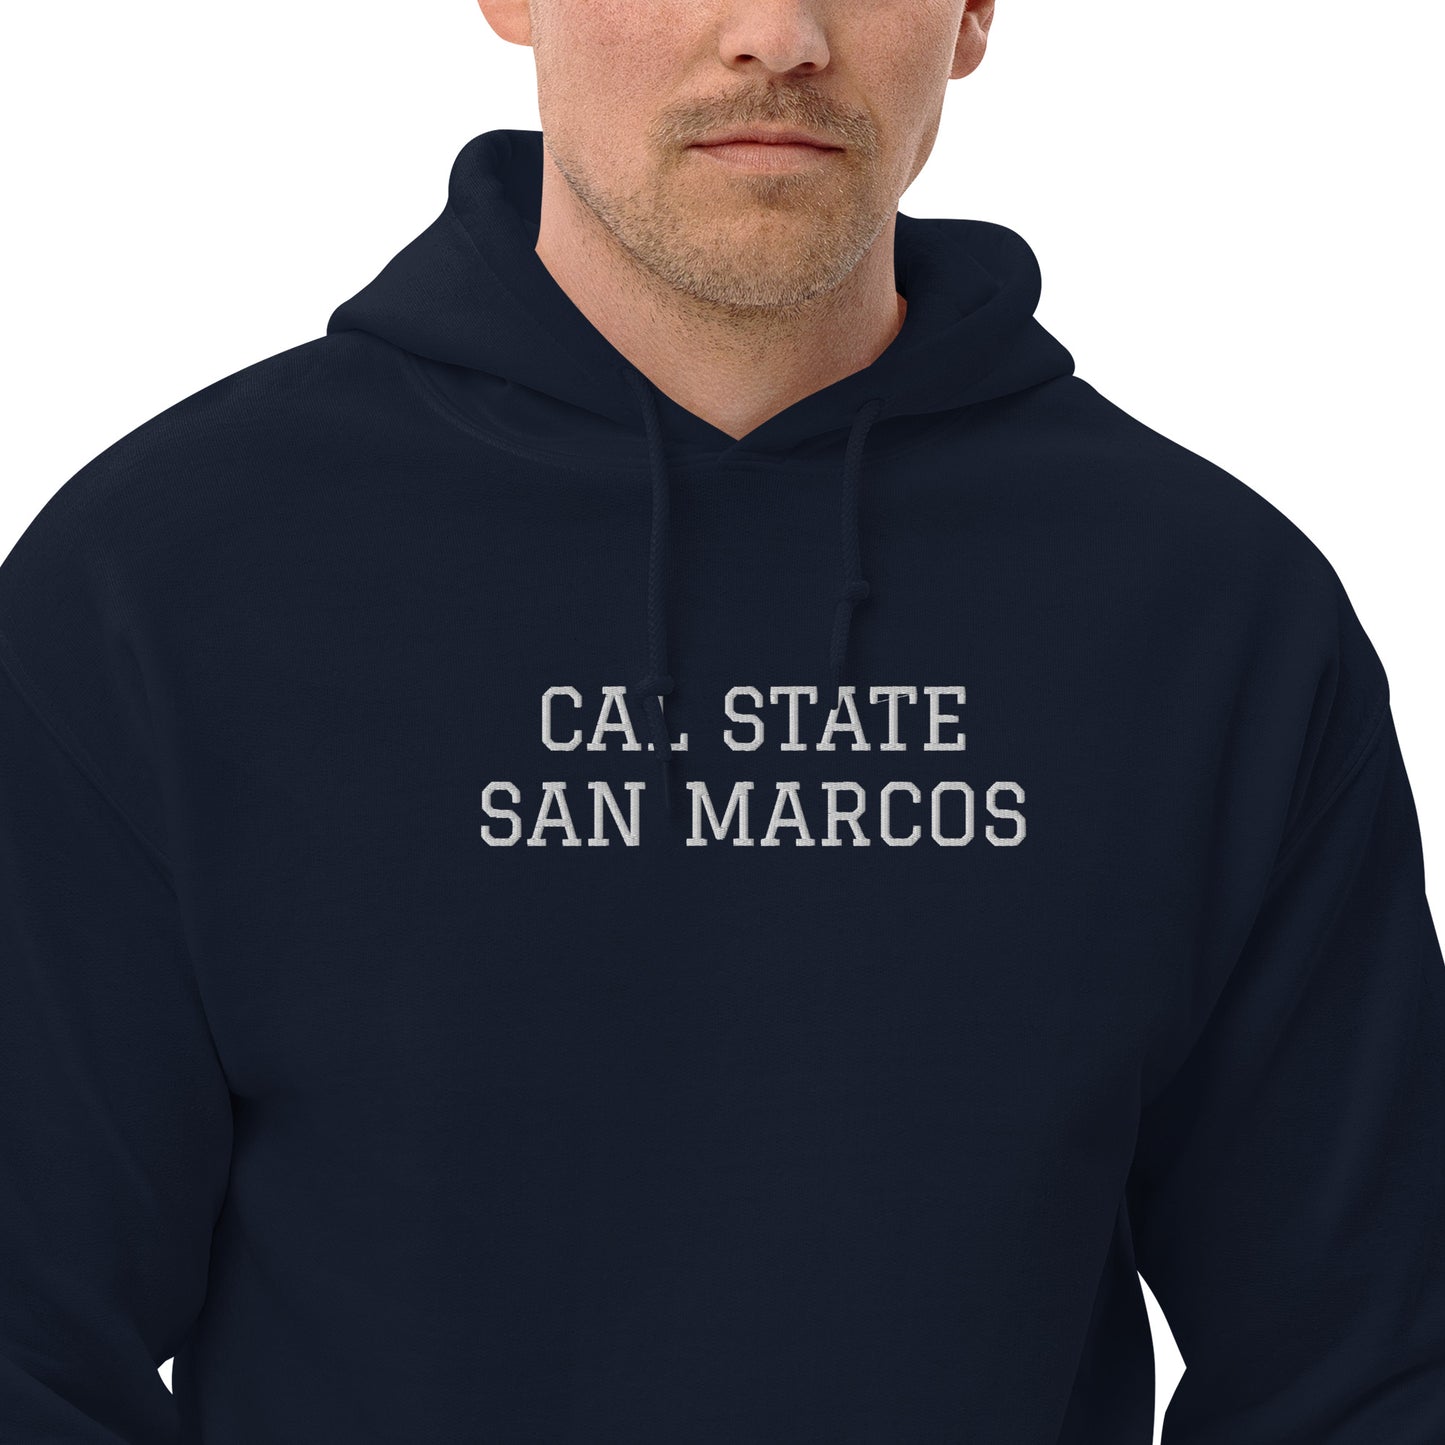 Cal State San Marcos Heavyweight Embroidered Hoodie